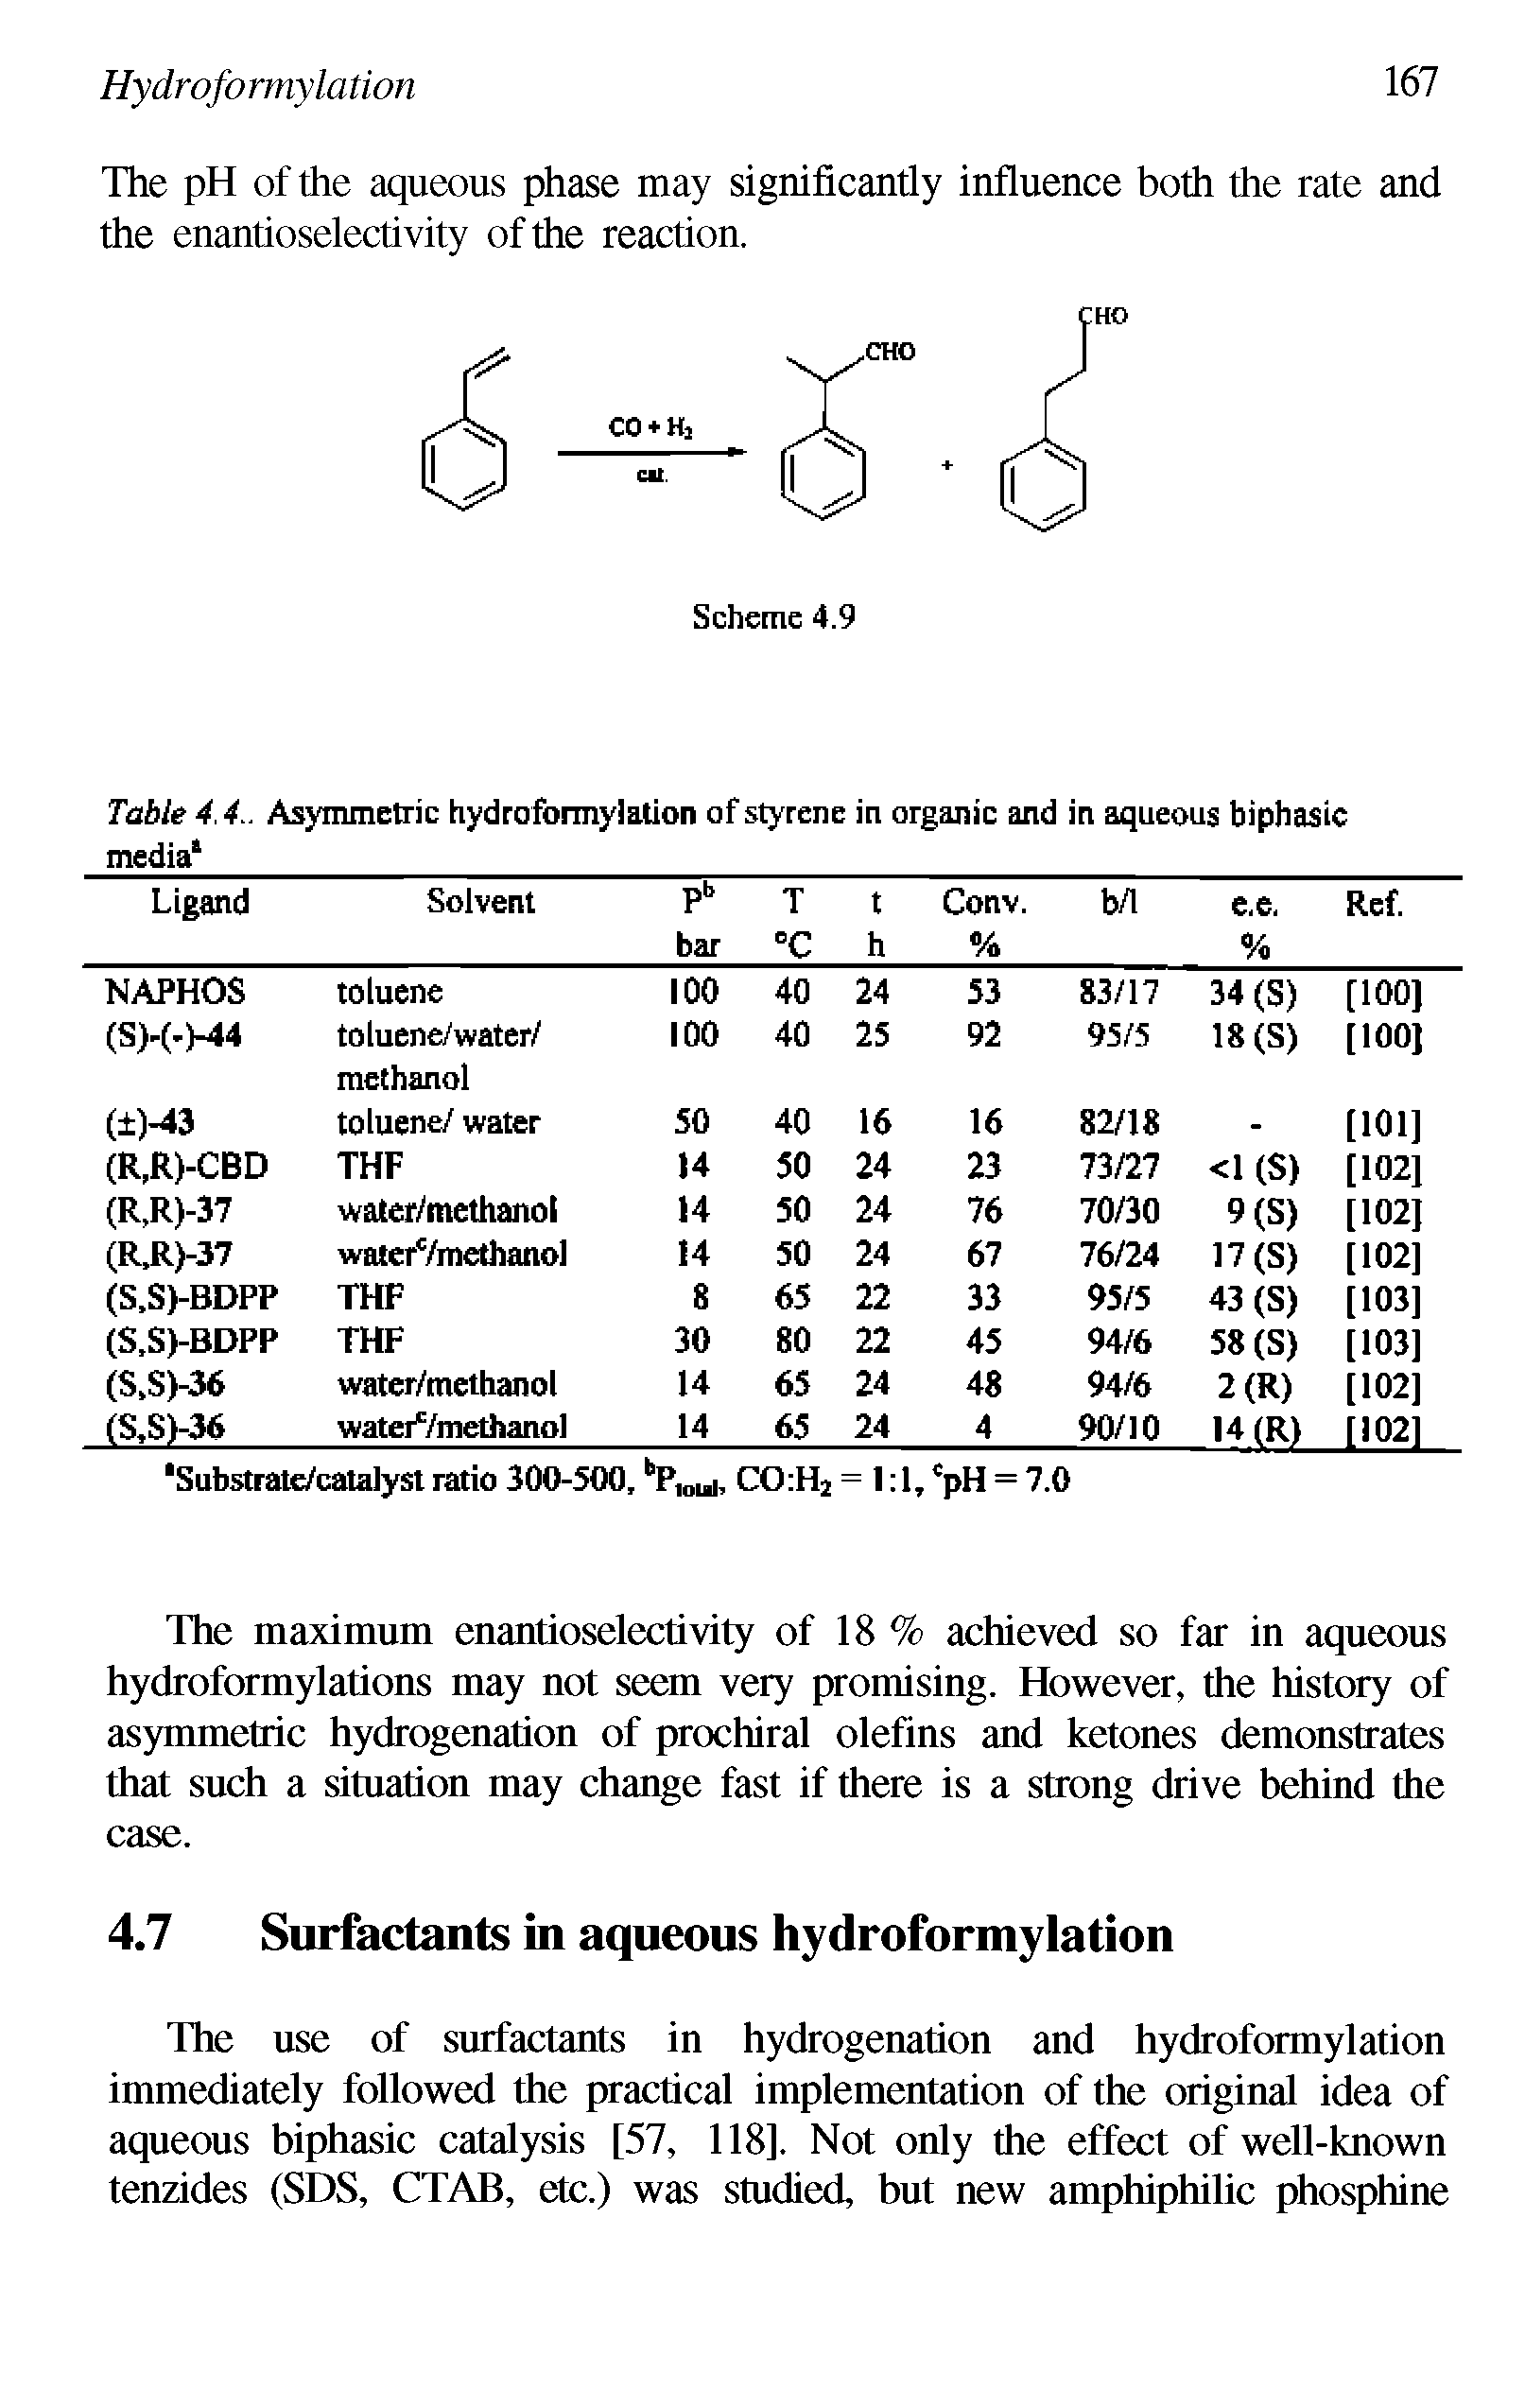 Table 4.4.. Asymmetric hydroformylation of styrene in organic and in aqueous biphasic media ...